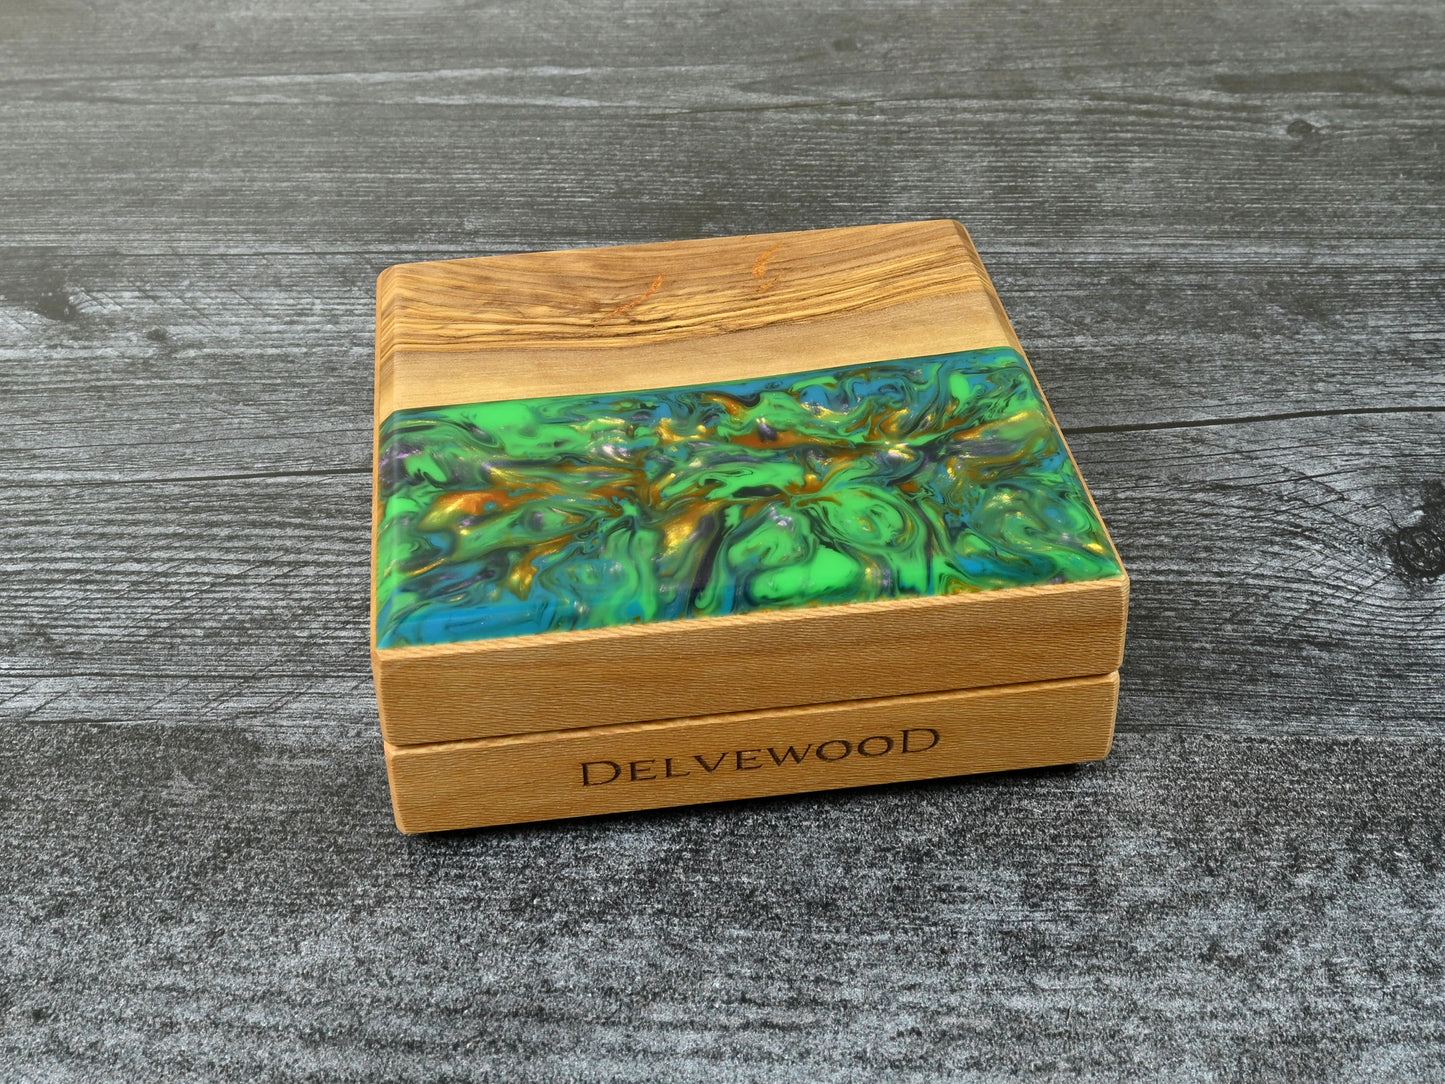 This Little Delver Dice Box features a sycamore wood core and an olivewood top veneer with green, turquoise, purple, and gold resin. D&D ttrpg.